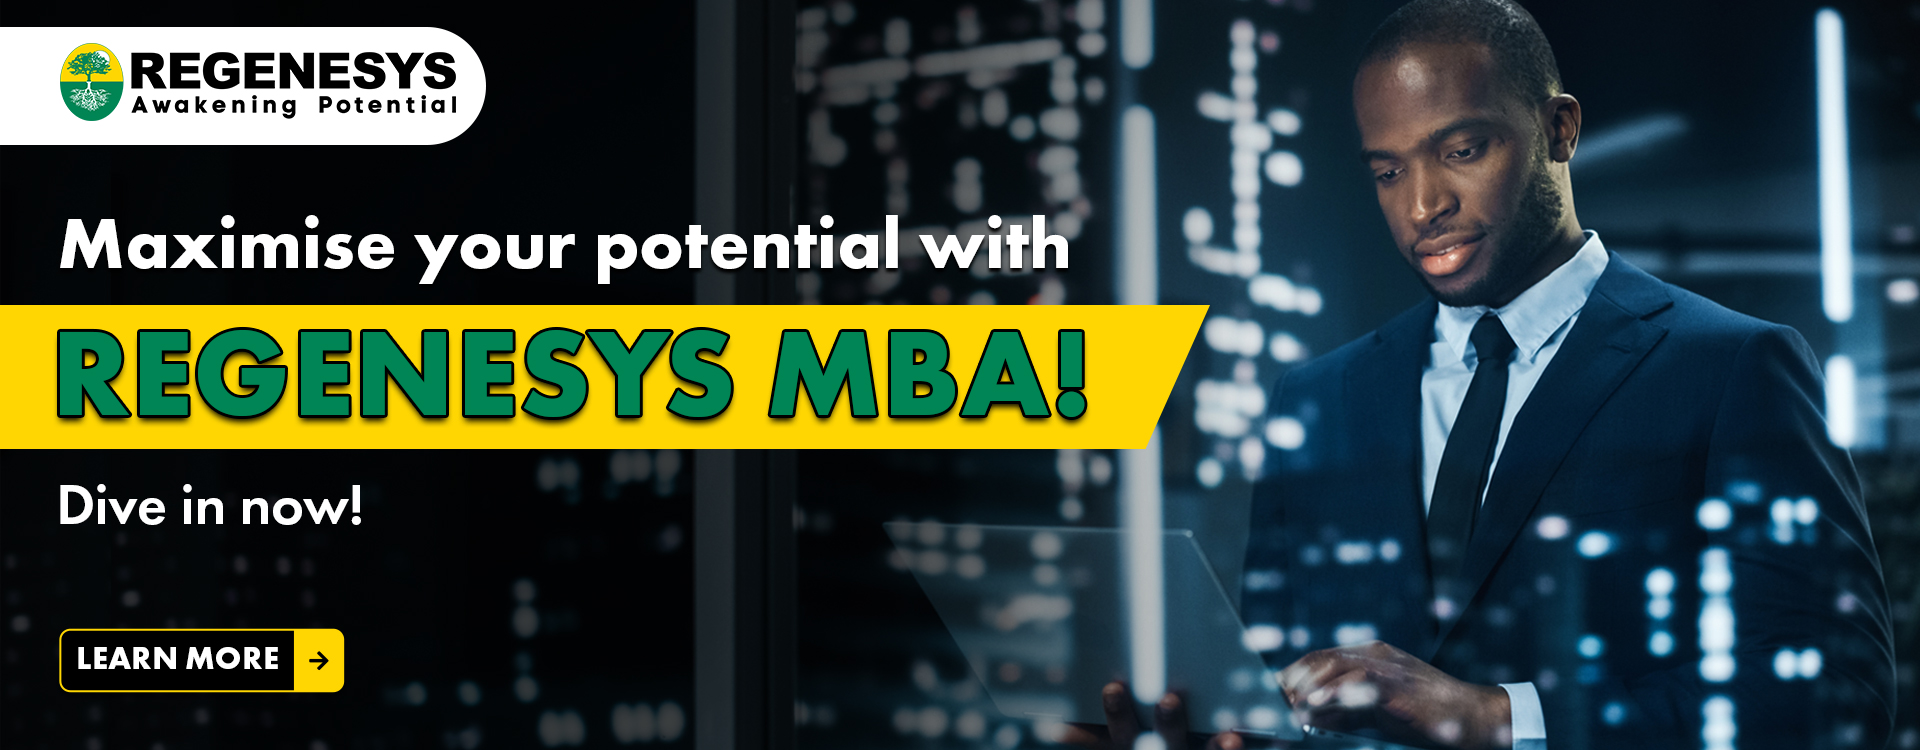 Maximise your potential with Regenesys MBA! Dive in now!